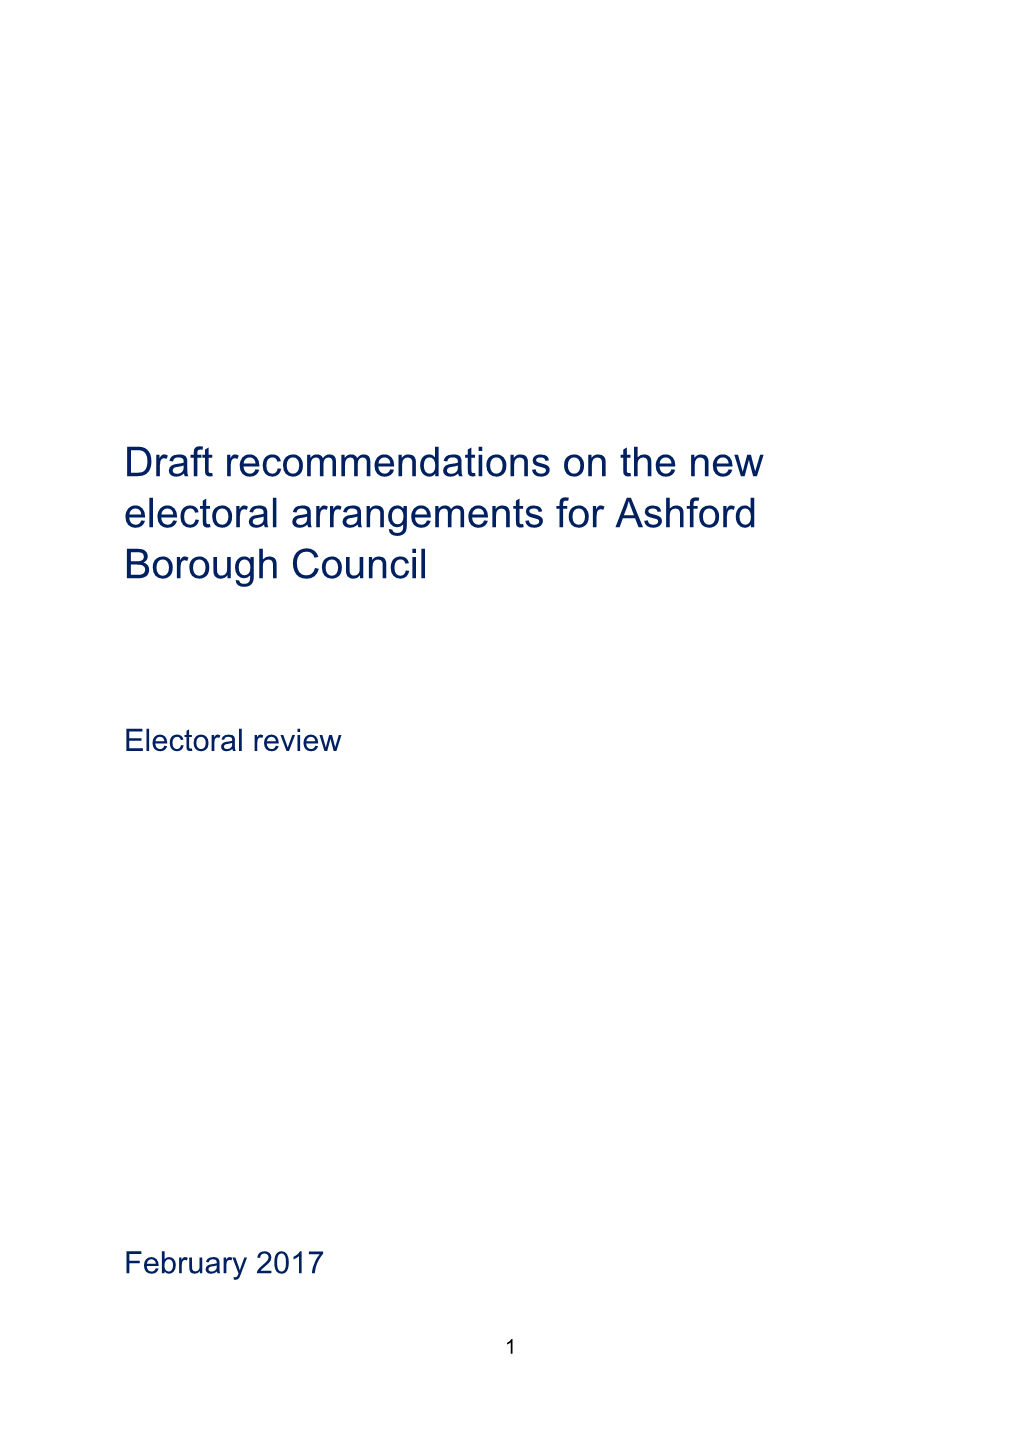 Draft Recommendations on the New Electoral Arrangements for Ashford Borough Council